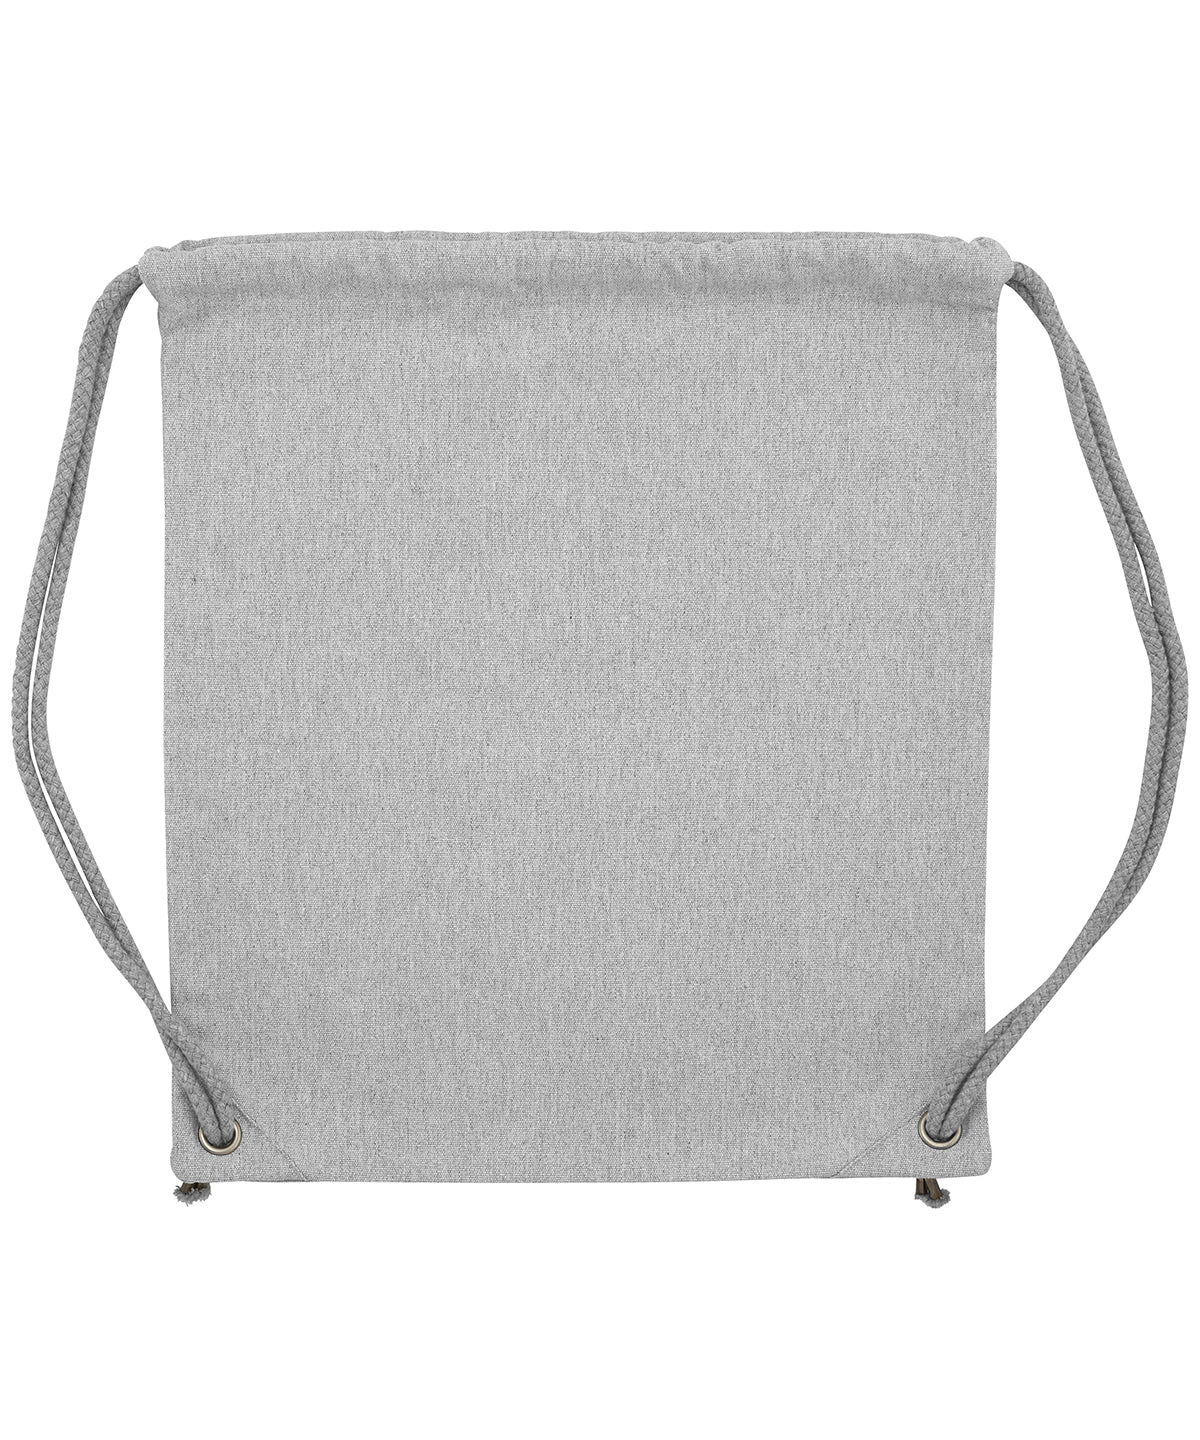 Recycled Canvas Woven Drawcord Gym Bag